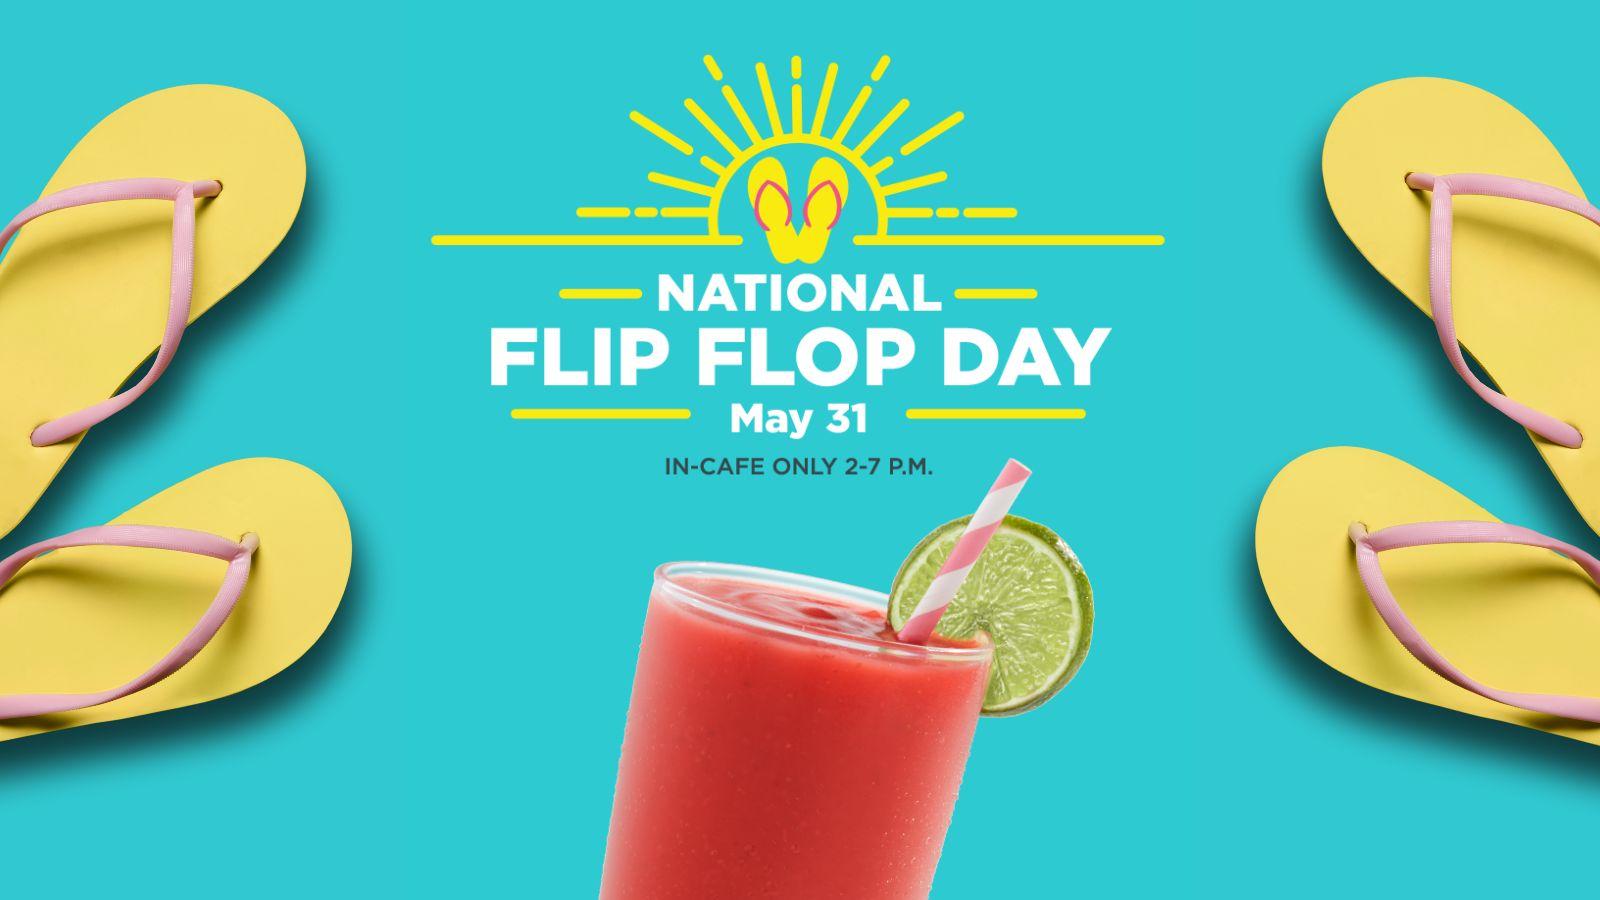 Tropical Smoothie Cafe Strawberry Margarita Smoothie for Free on May 31st